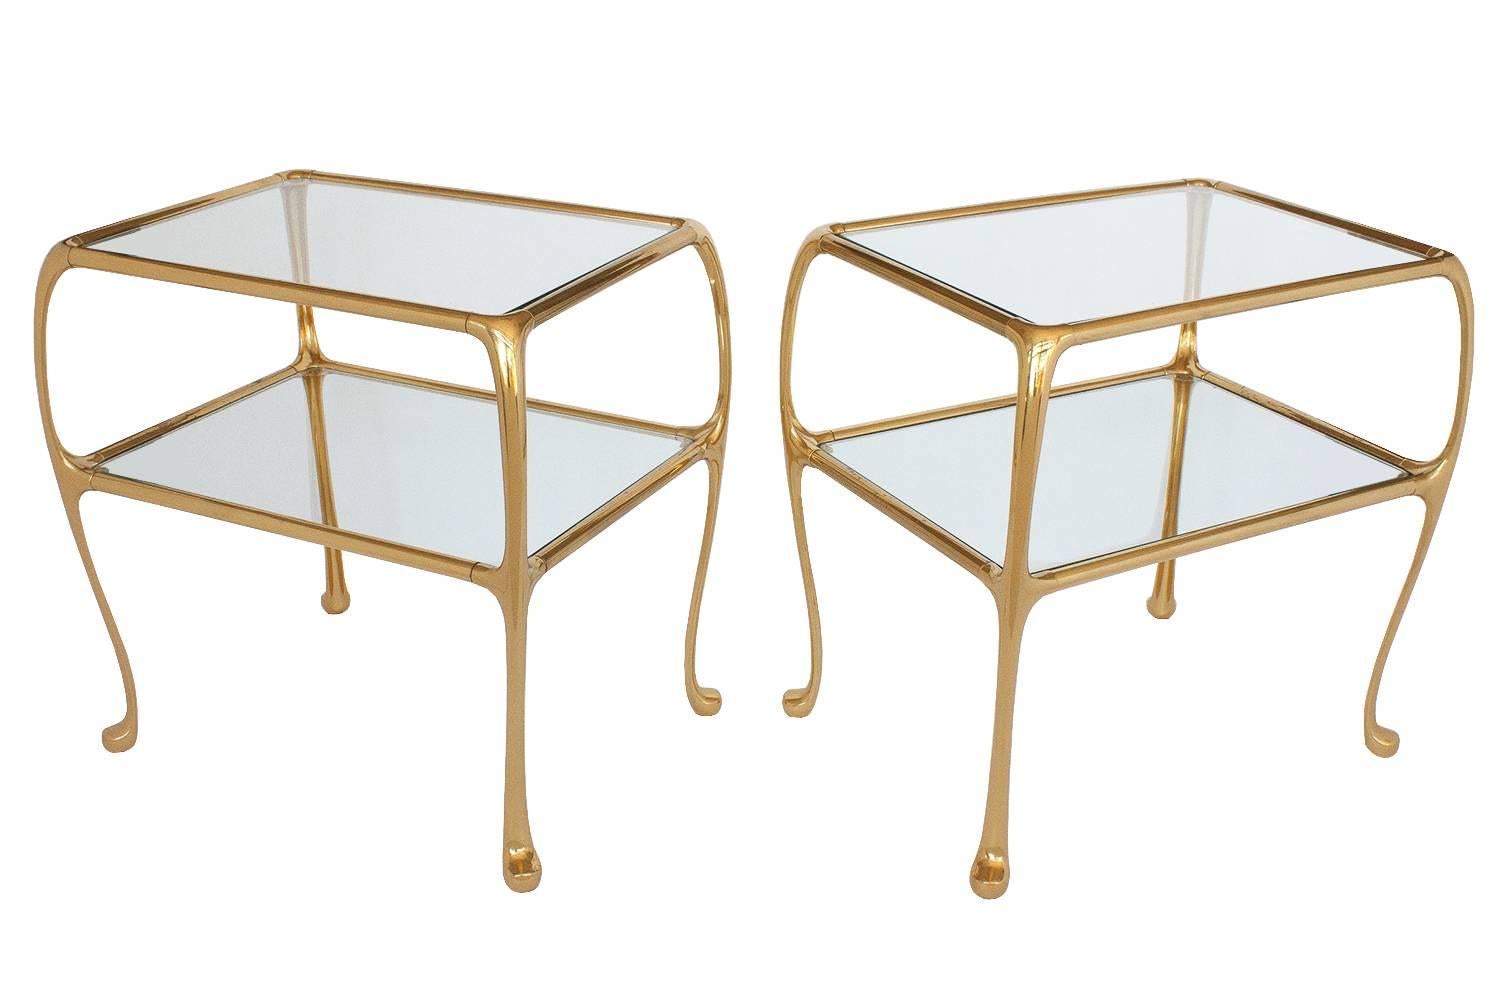 Pair of Gaudi/Art Nouveau inspired brass two-tier end tables. Curvaceous stylized modern Queen Anne legs. Inset glass top and lower shelf. Lower tier measures 13" H. Consider using as end tables or pair of nightstands.